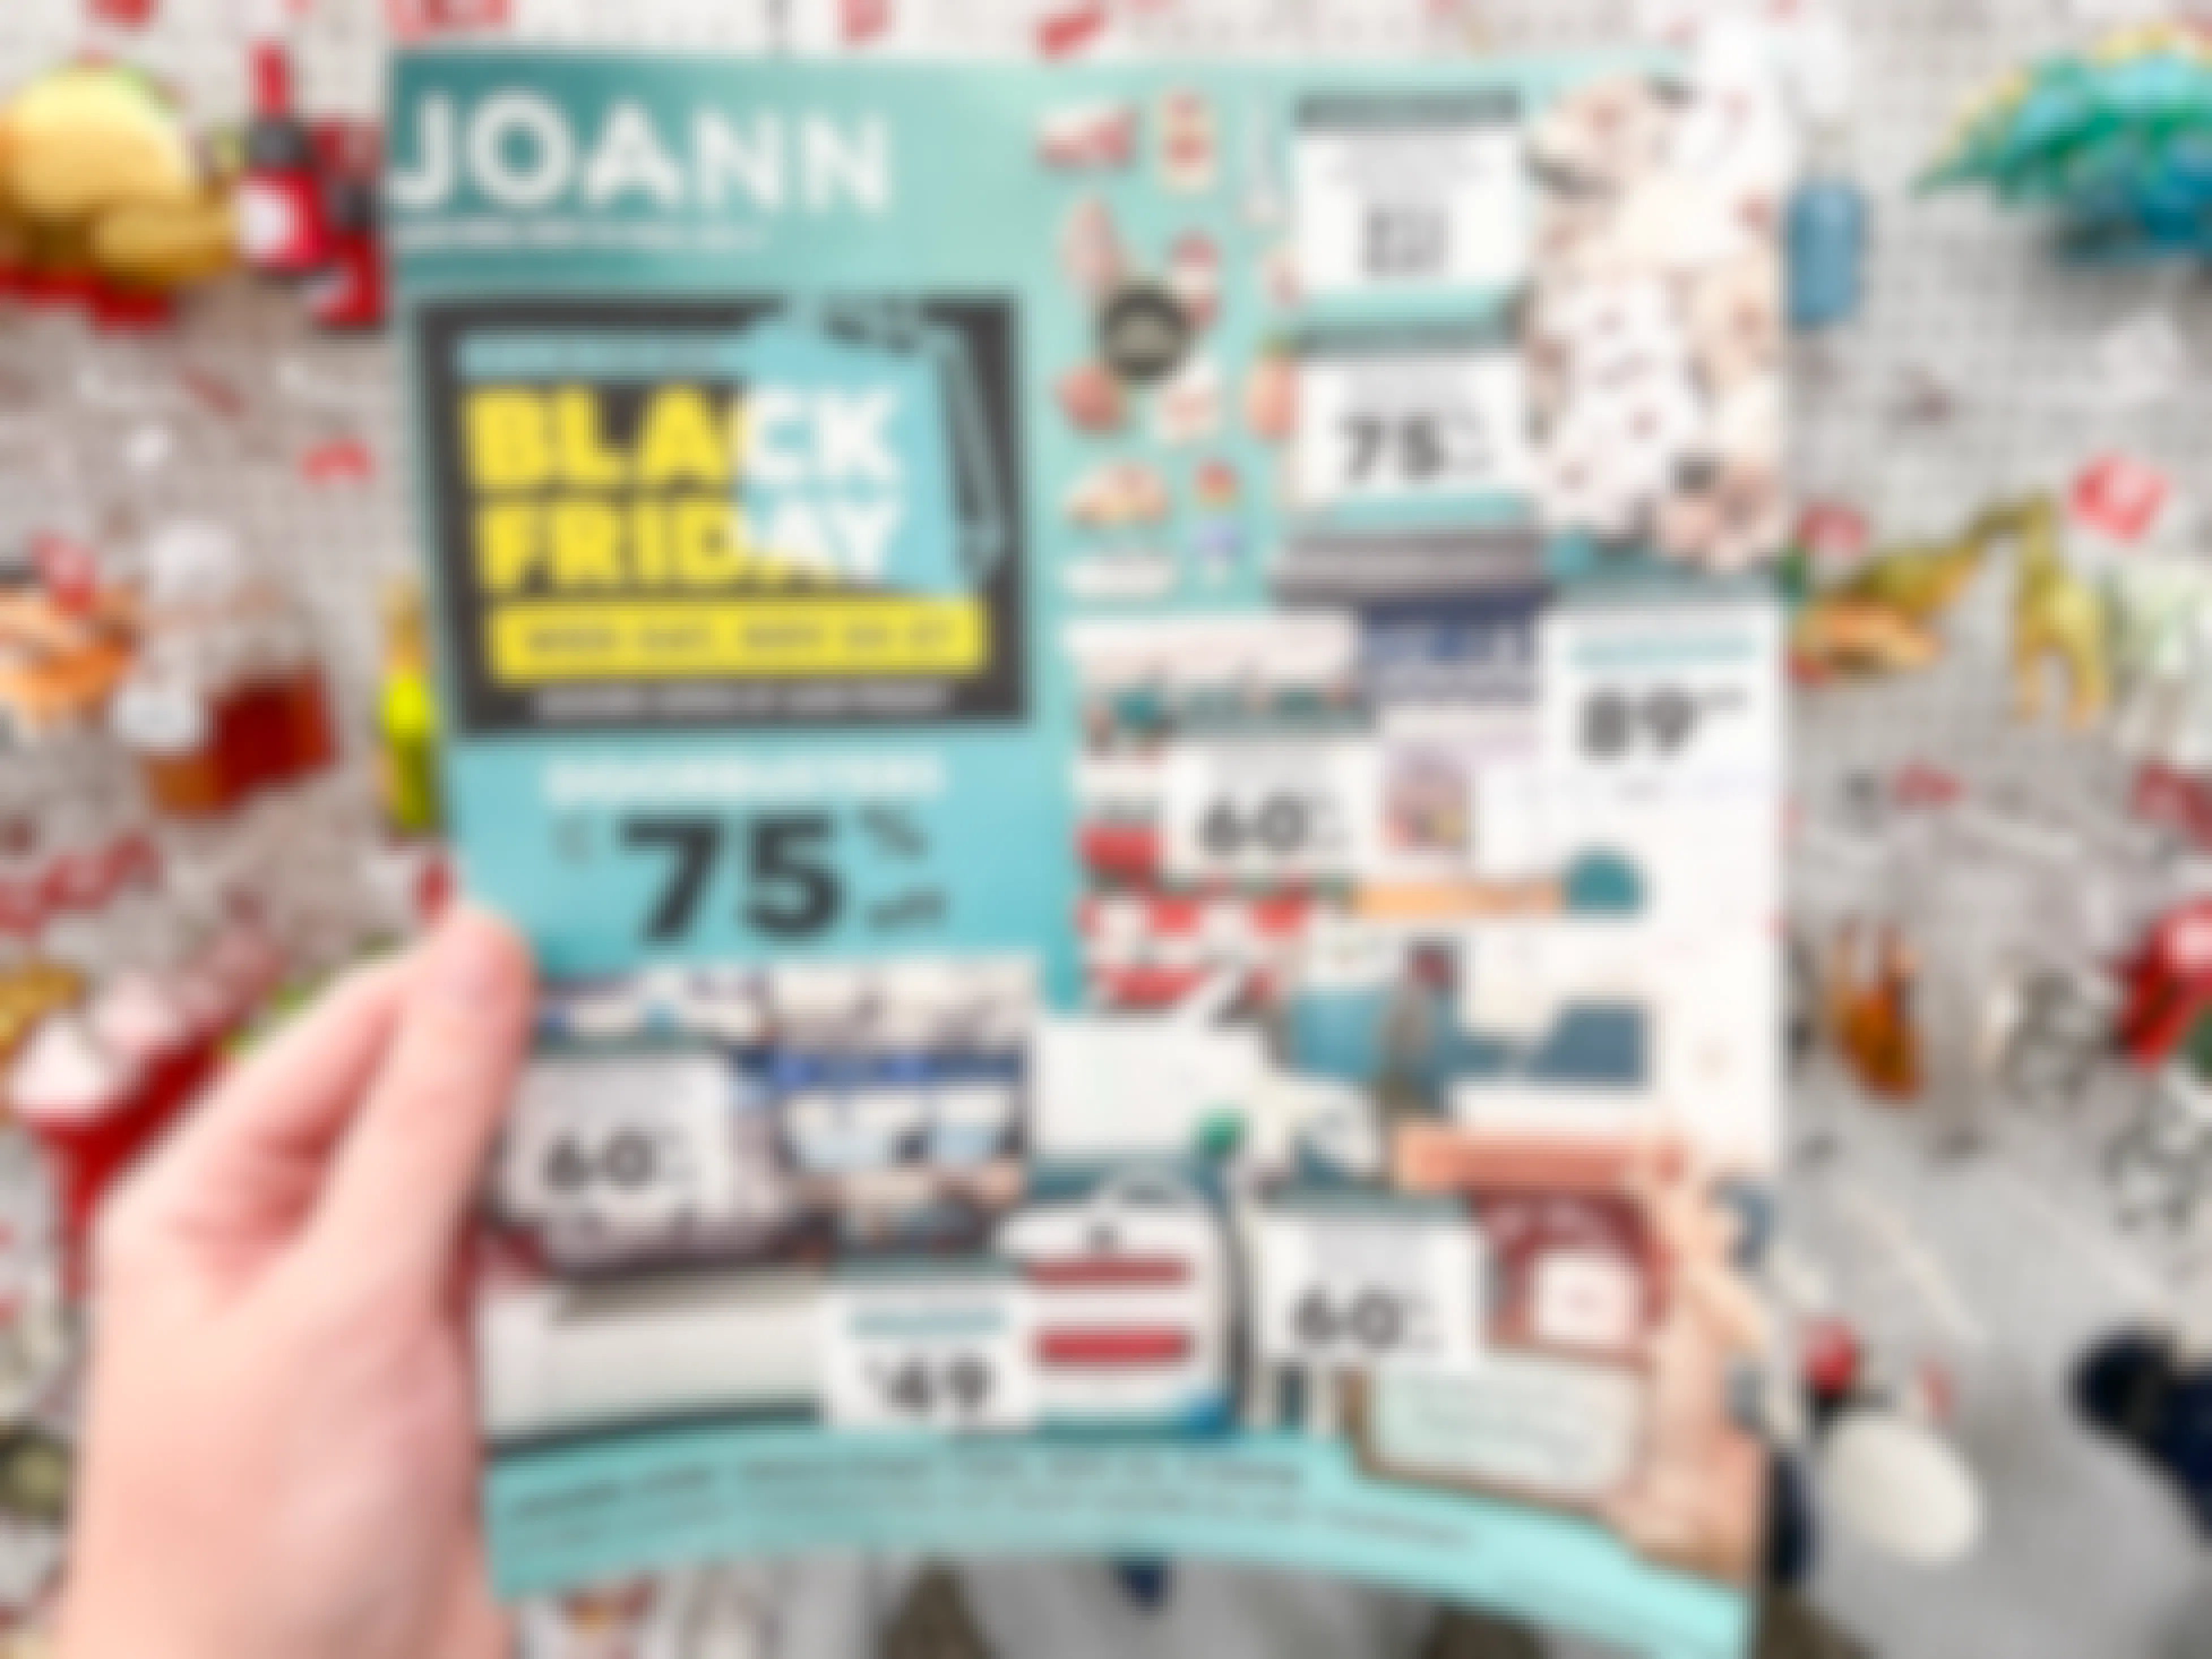 A Joann Black Friday add held in front of Christmas Ornaments.